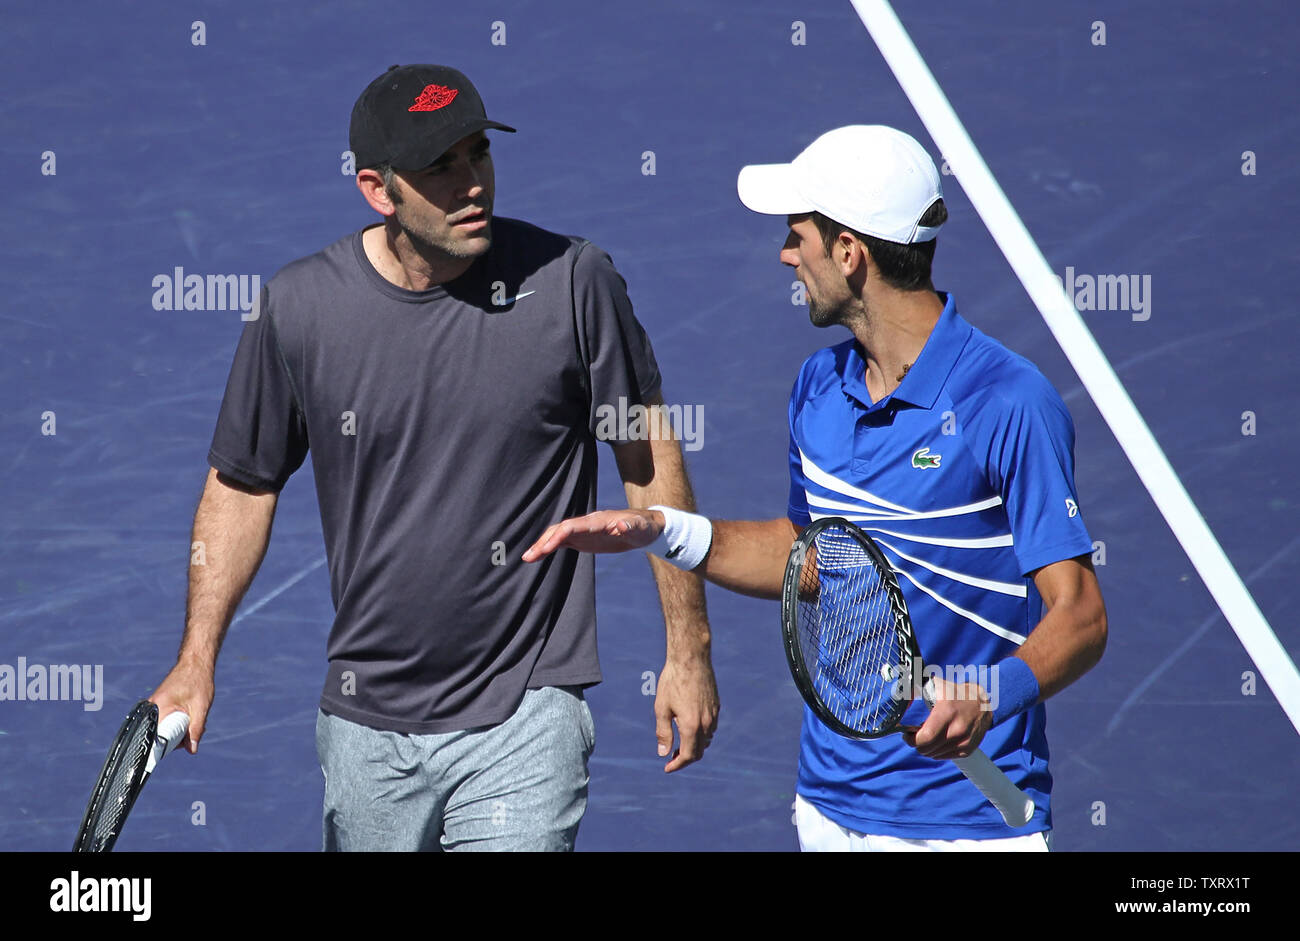 american-pete-sampras-l-and-novak-djokovic-of-serbia-talk-to-each-other-after-a-point-during-an-exhibition-match-at-the-bnp-paribas-open-in-indian-wells-california-on-march-16-2019-the-exhibition-was-arranged-after-the-cancellation-of-the-semifinals-match-between-roger-federer-and-rafael-nadal-due-to-a-nadal-knee-injury-photo-by-david-silpaupi-TXRX1T.jpg